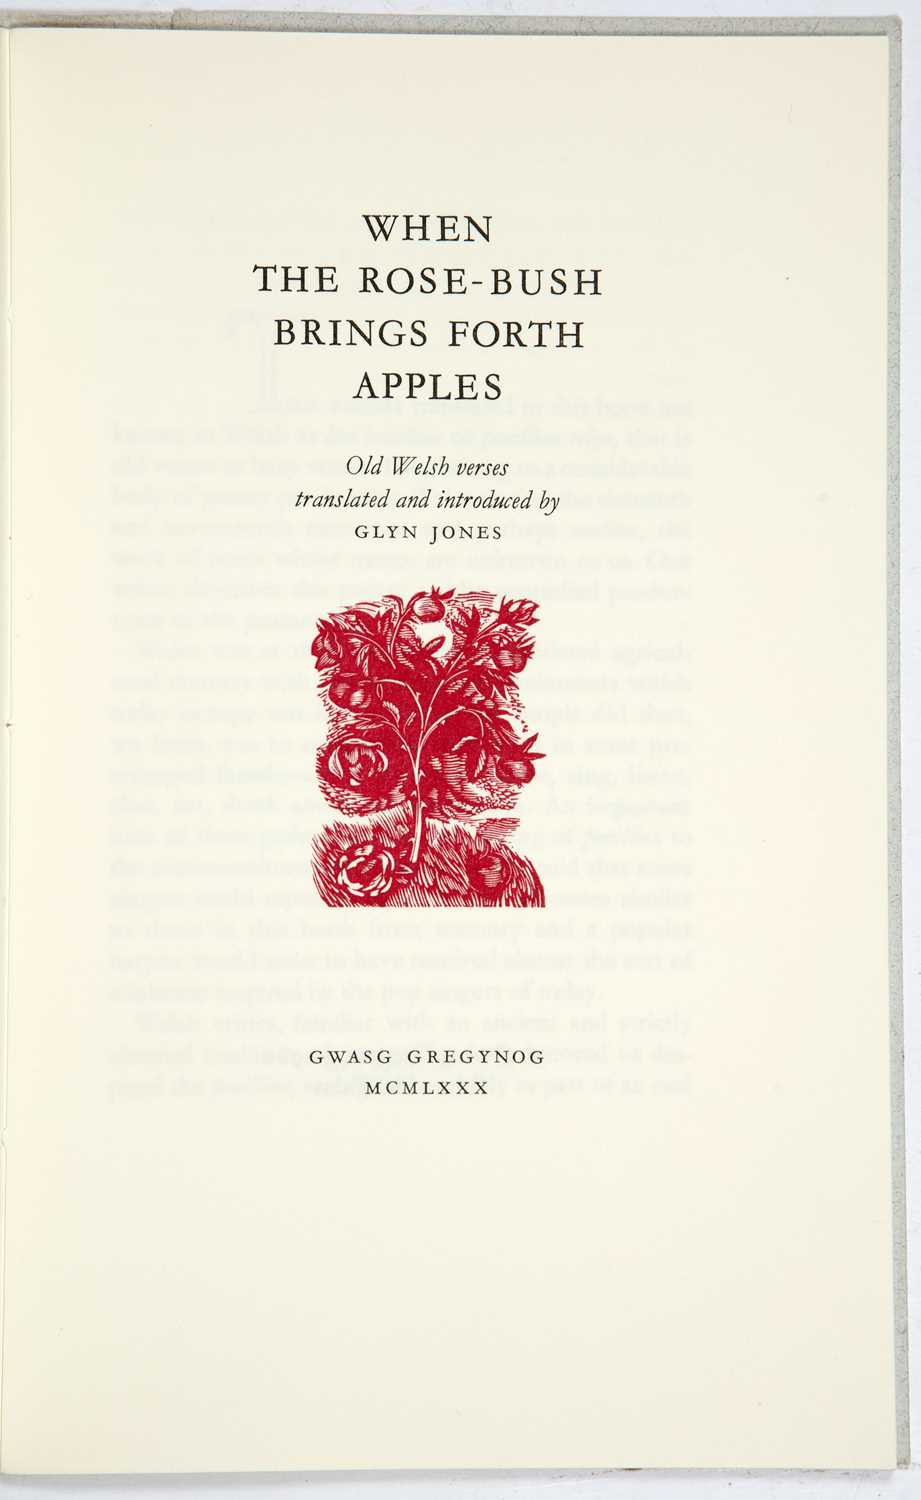 Gregynog Press. Four Great Castles. An Essay by Arnold Taylor. David Woodford (Illus) 1983 with - Image 2 of 2